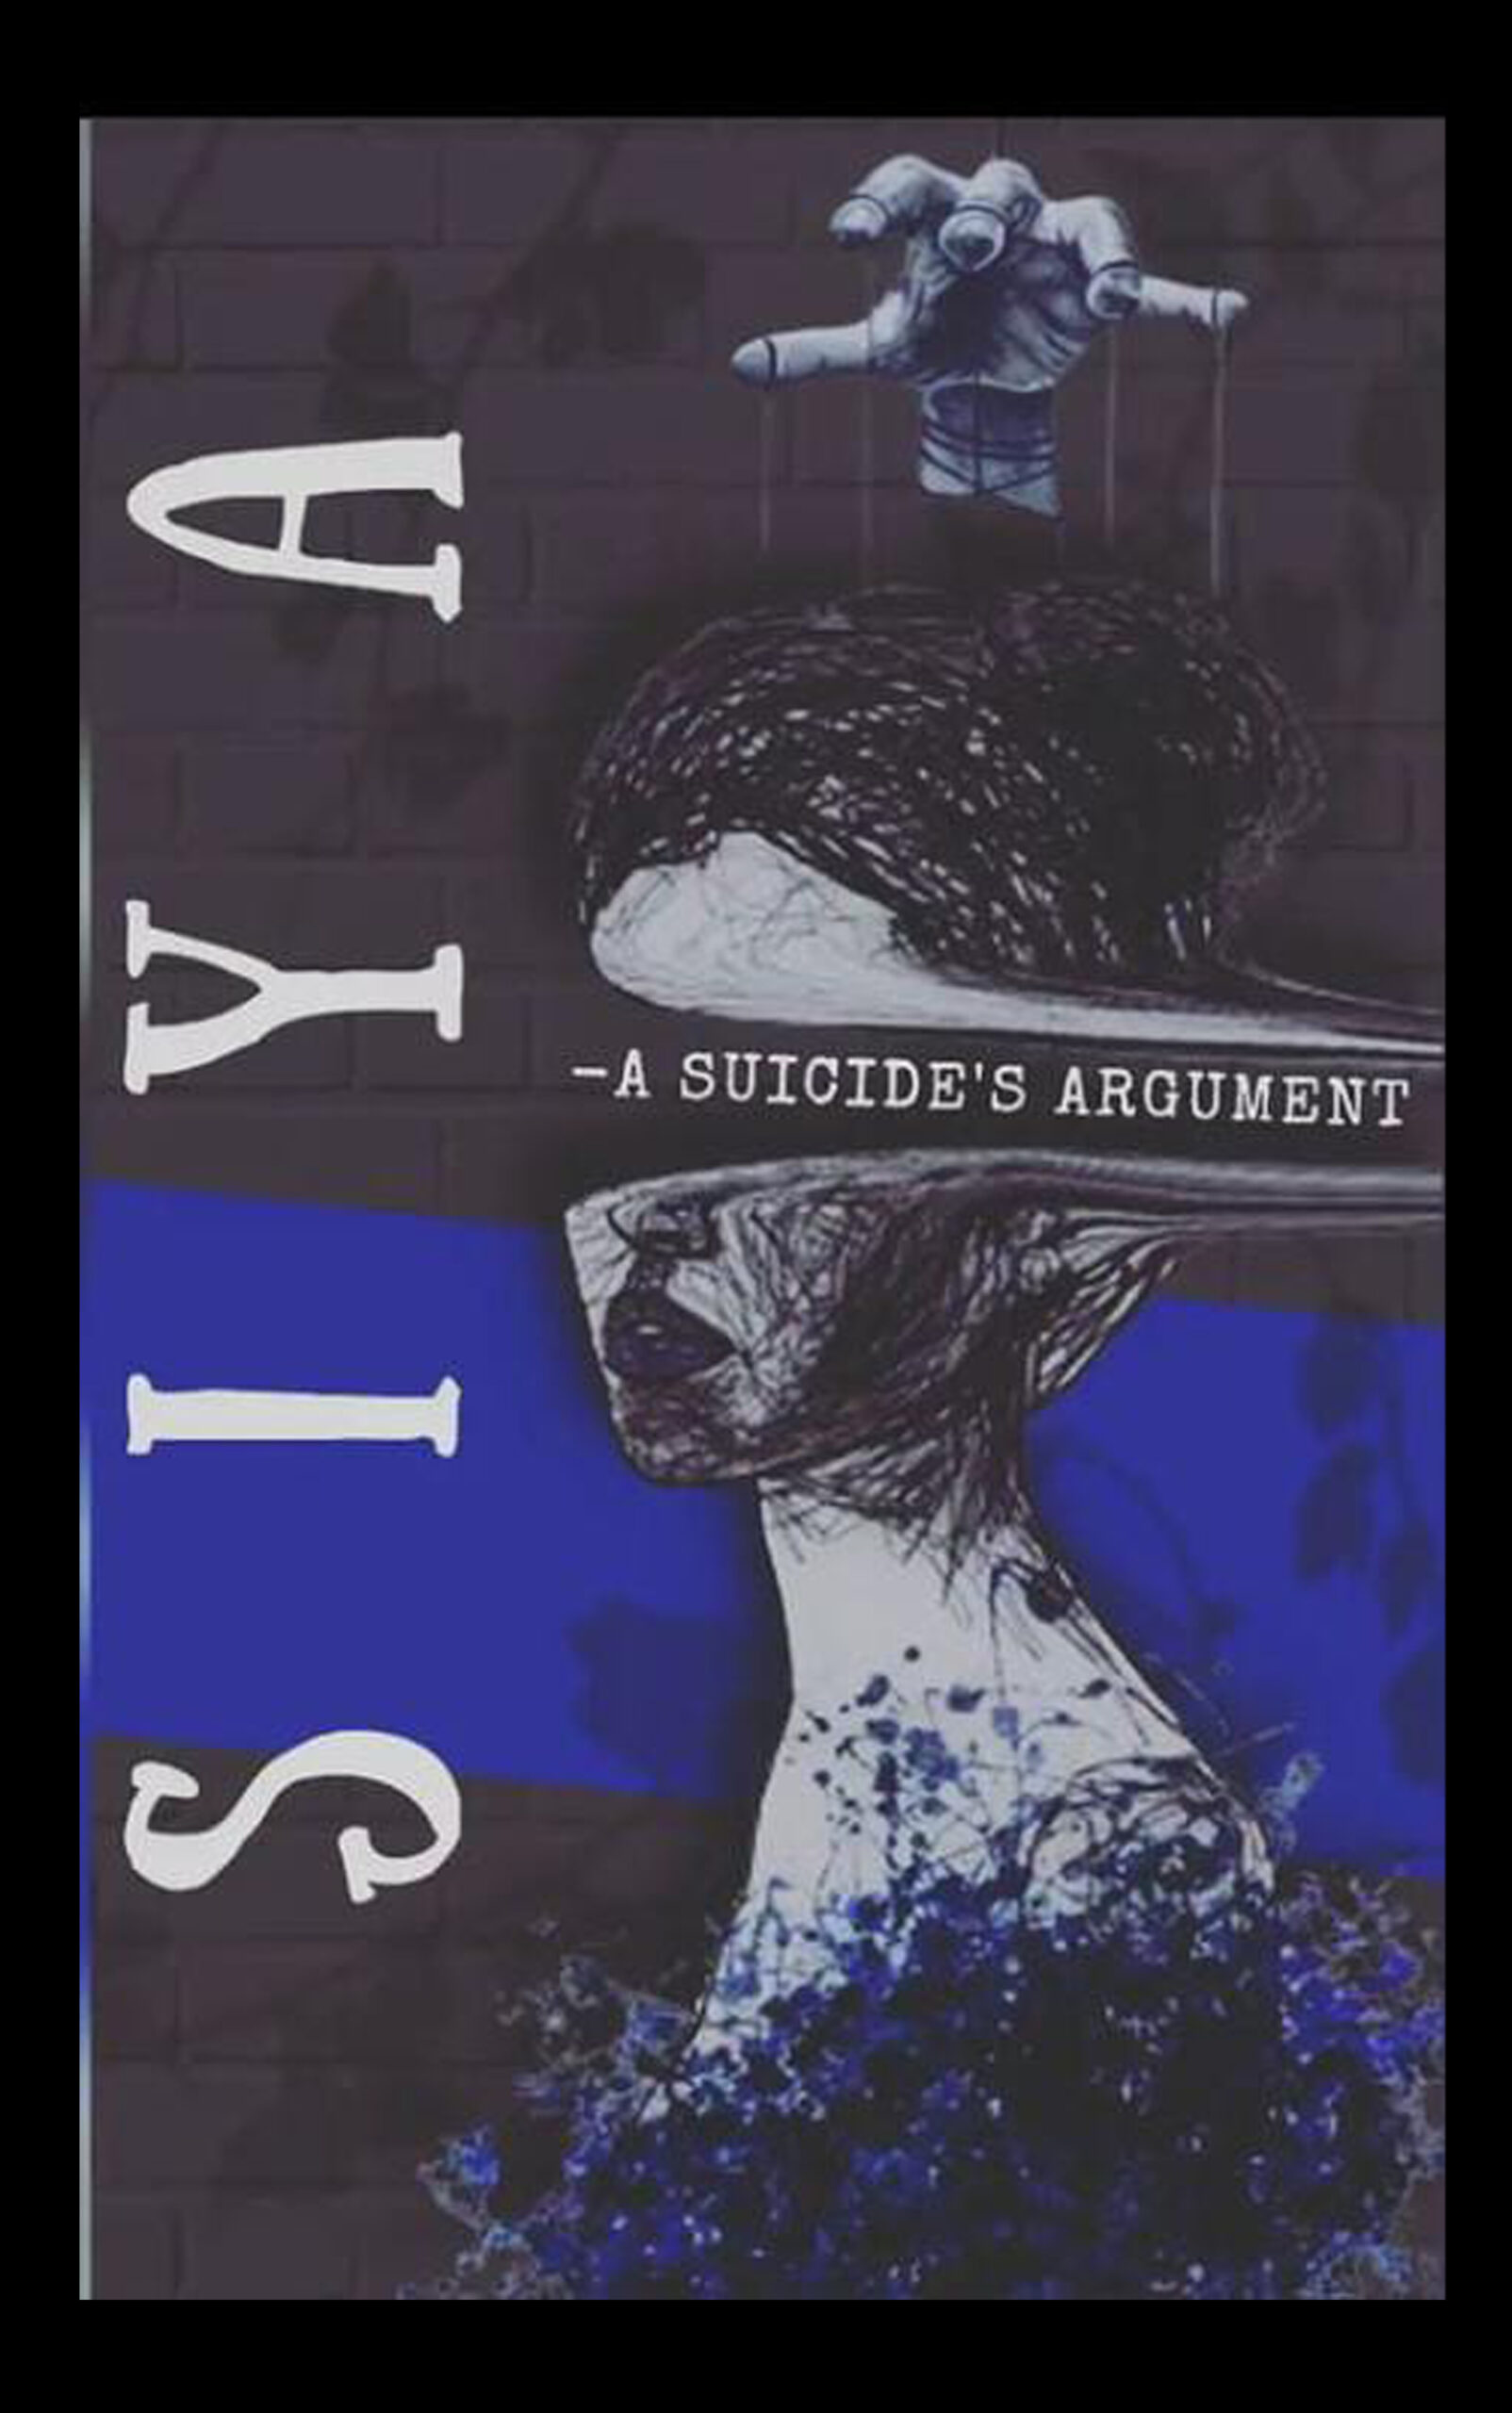 Cover of Siya. It shows a woman held by puppet strings.